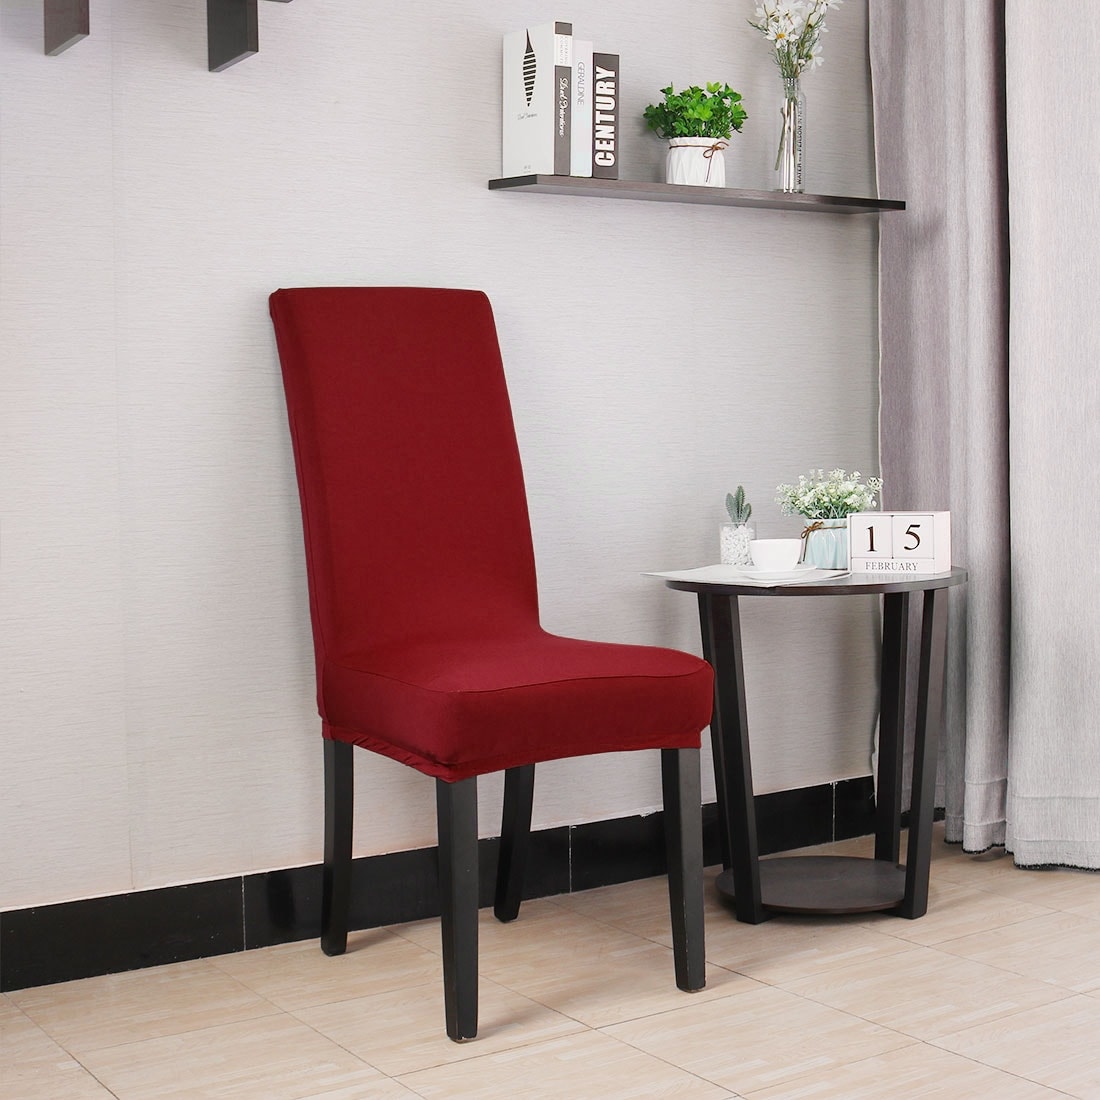 Shop Dining Chair Cover Kitchen Chair Protector Spandex Chair Seat